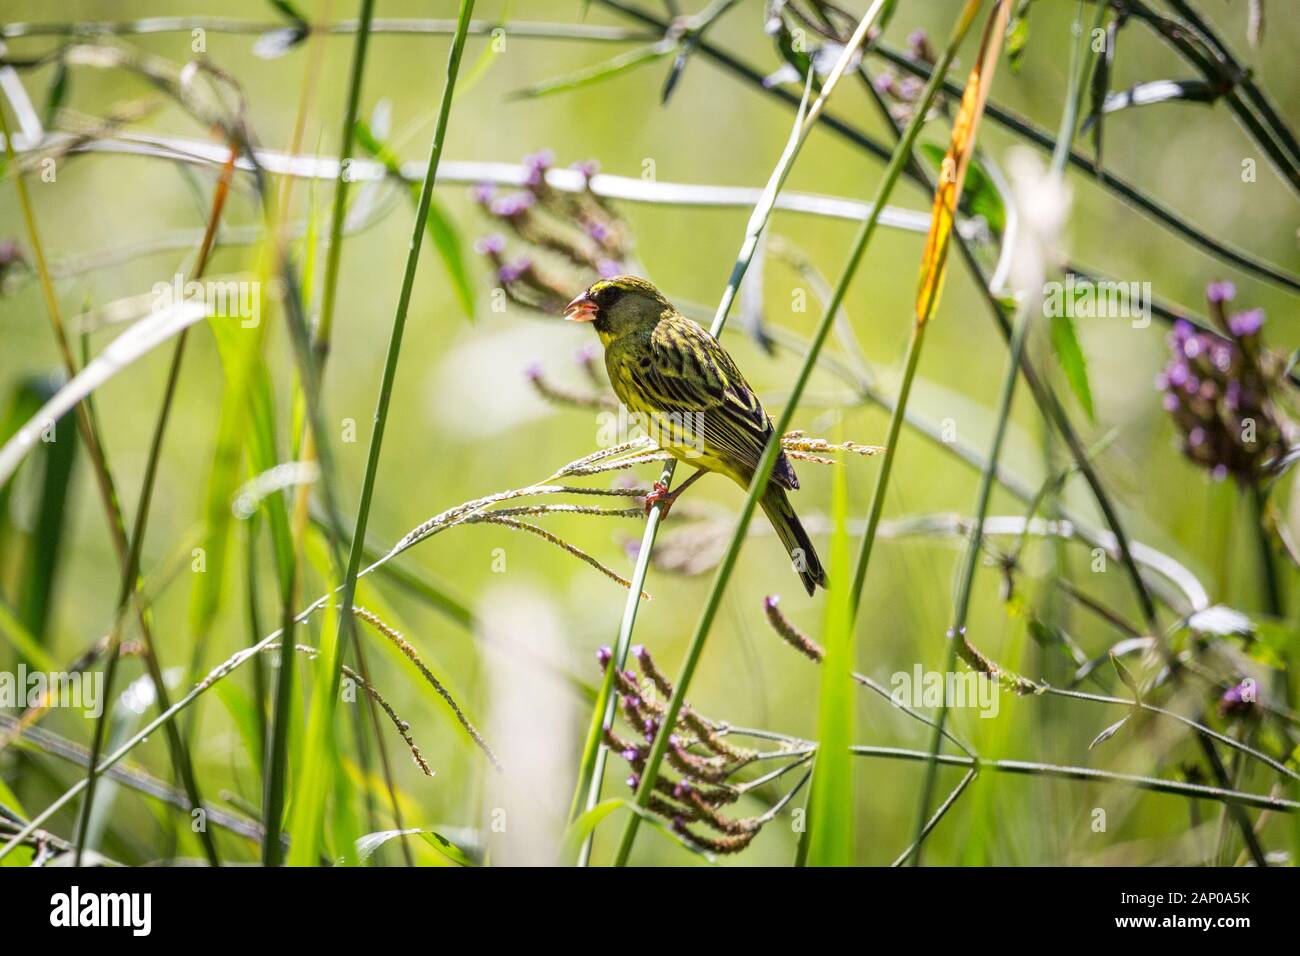 Weaver bird with yellow plumage sitting on a blade of grass, South Africa Stock Photo